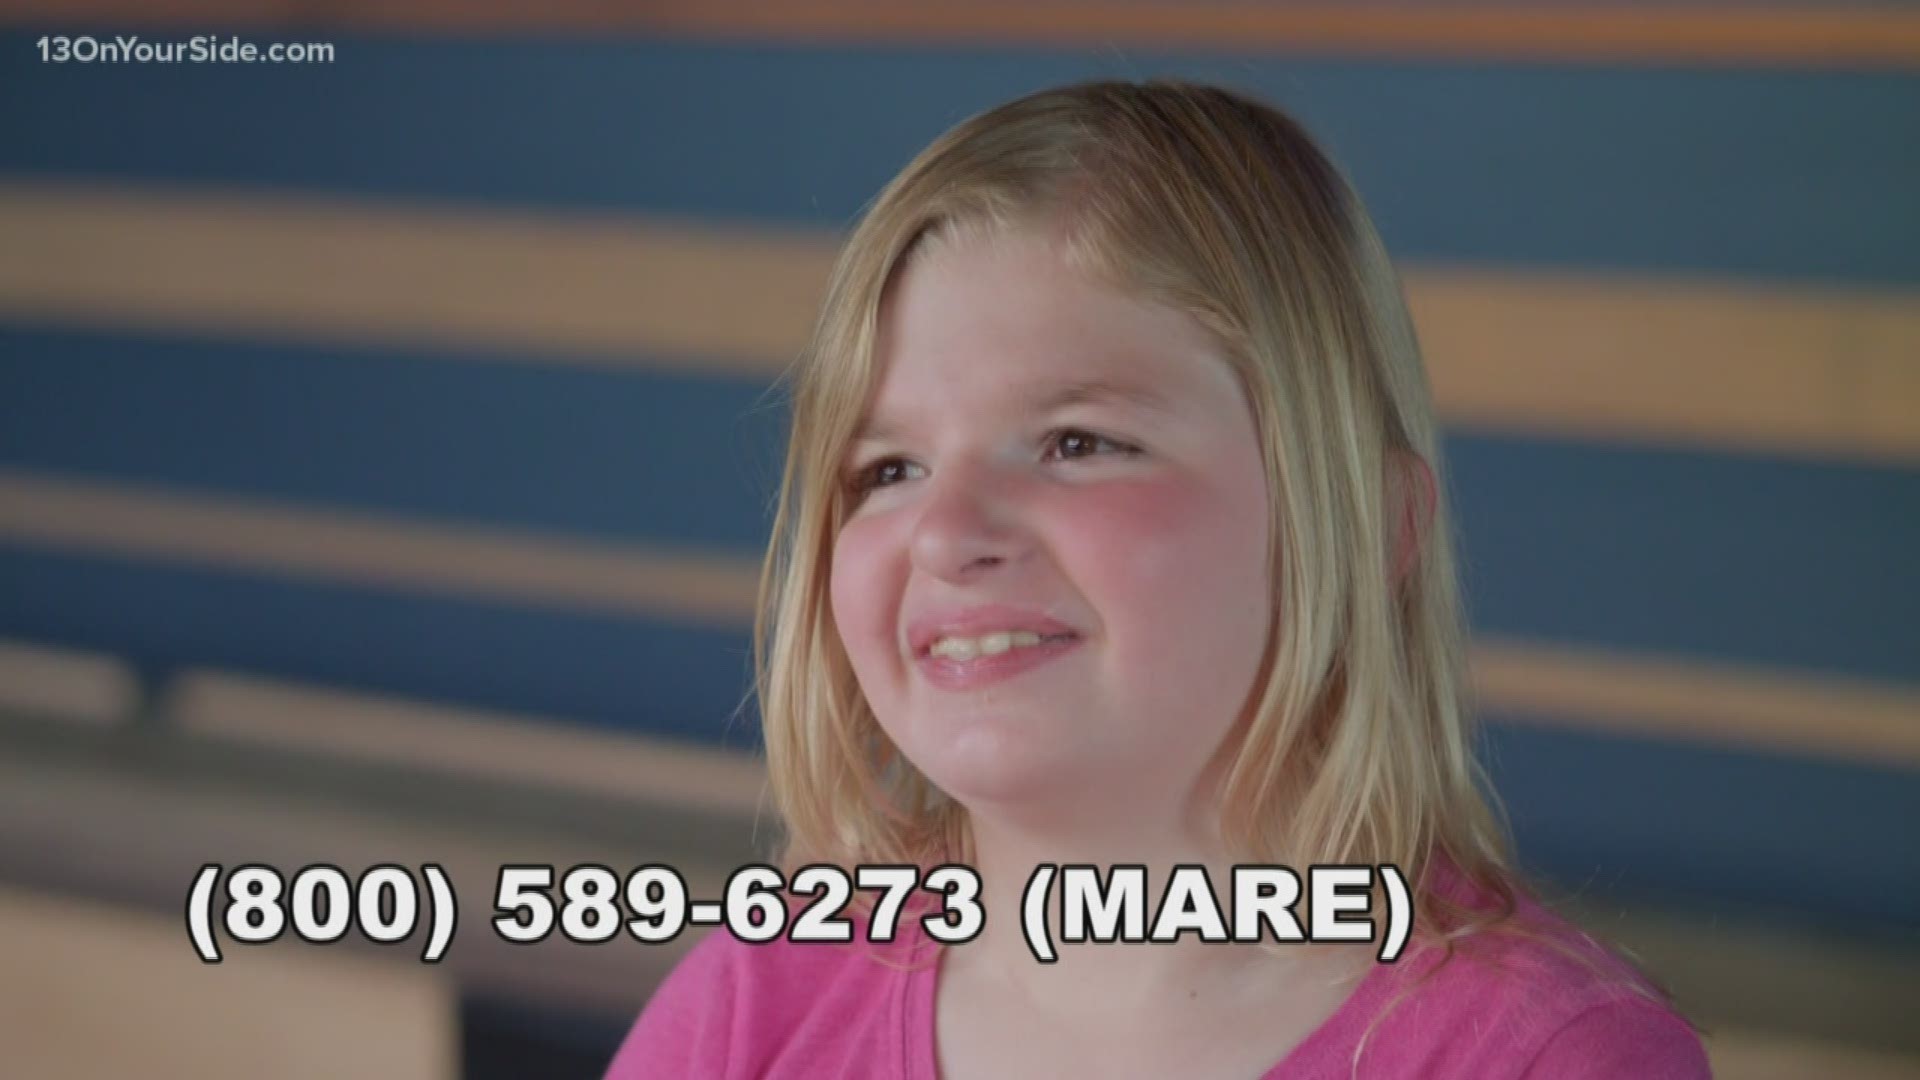 It's time to help this 12-Year-Old find her forever family.